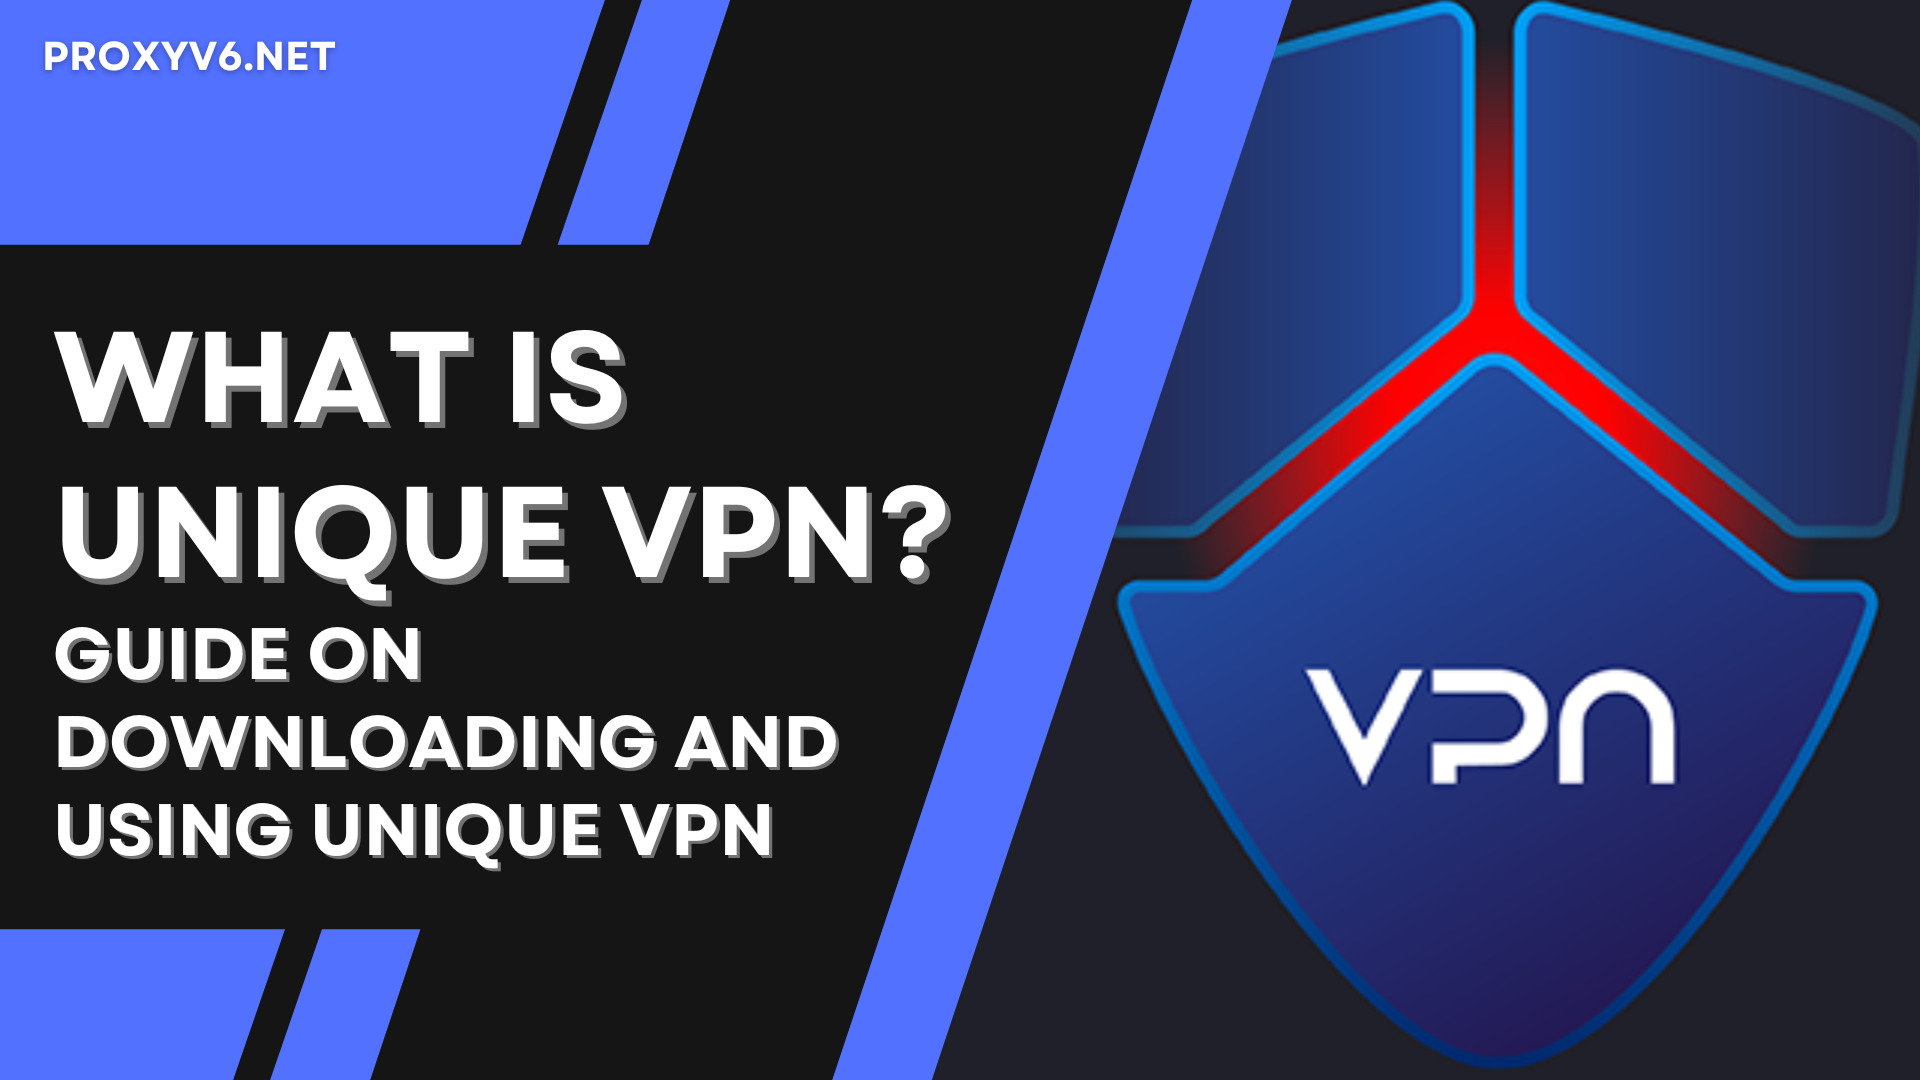 What is Unique VPN? Guide on downloading and using Unique VPN